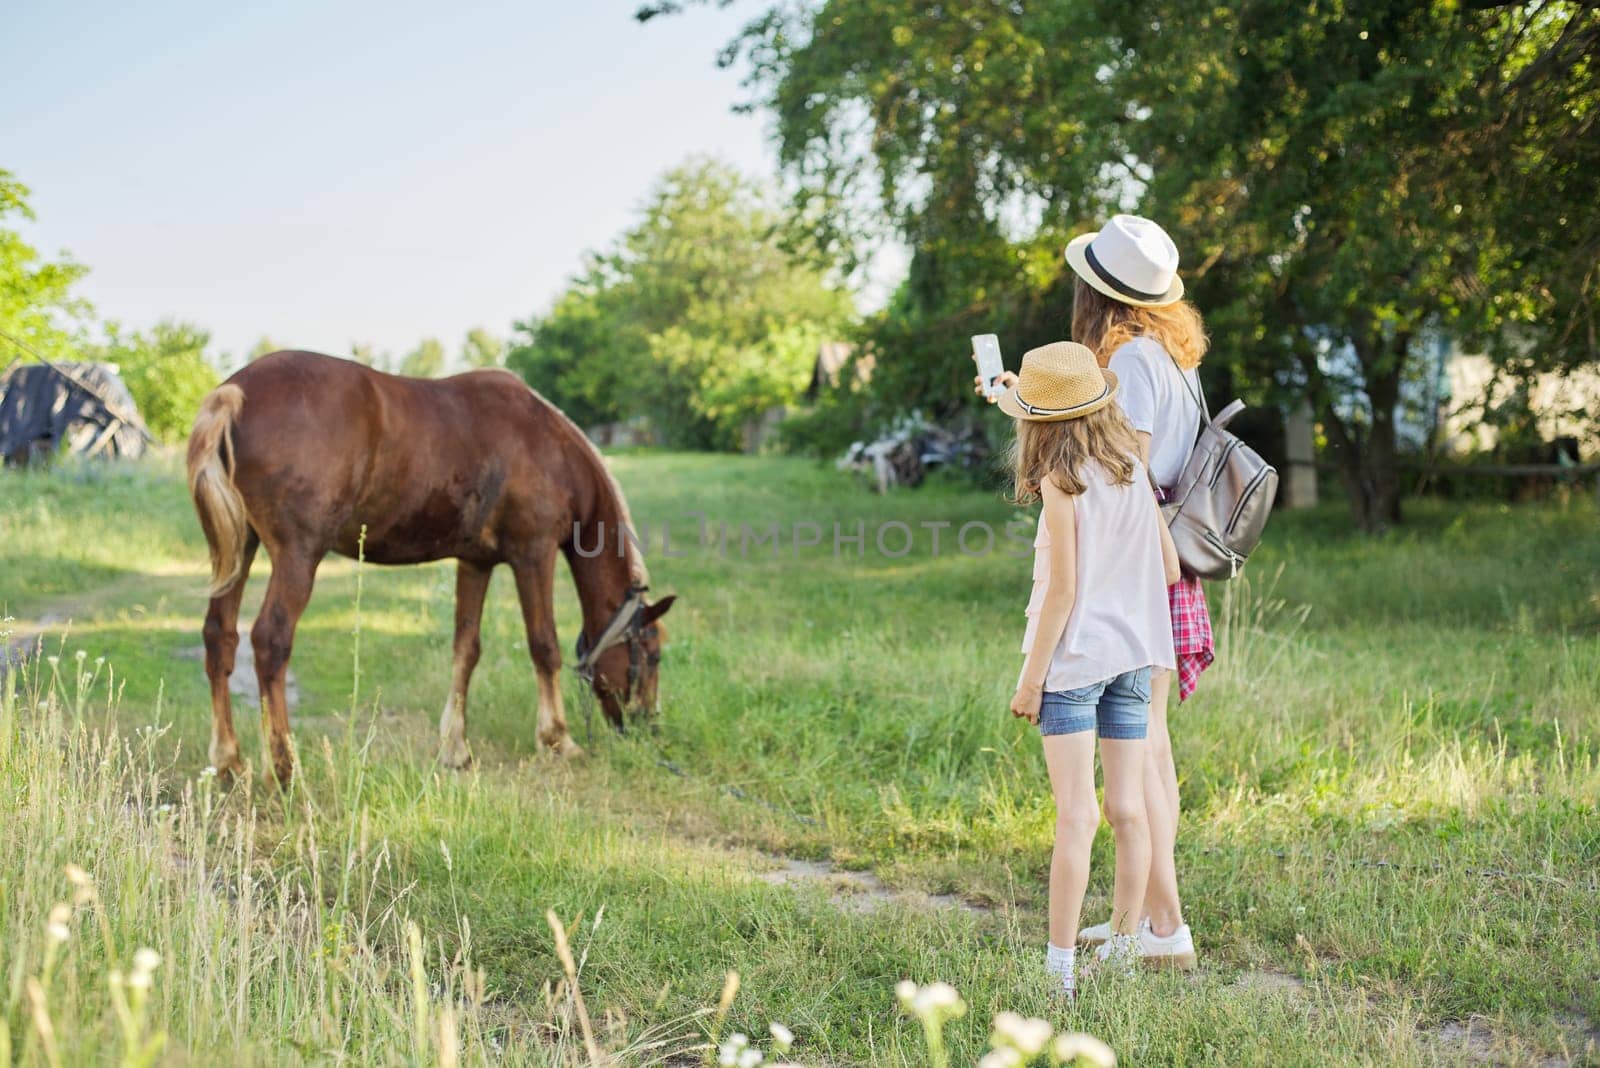 Children two girls photographing farm horse on smartphone. Rustic country style, summer nature background